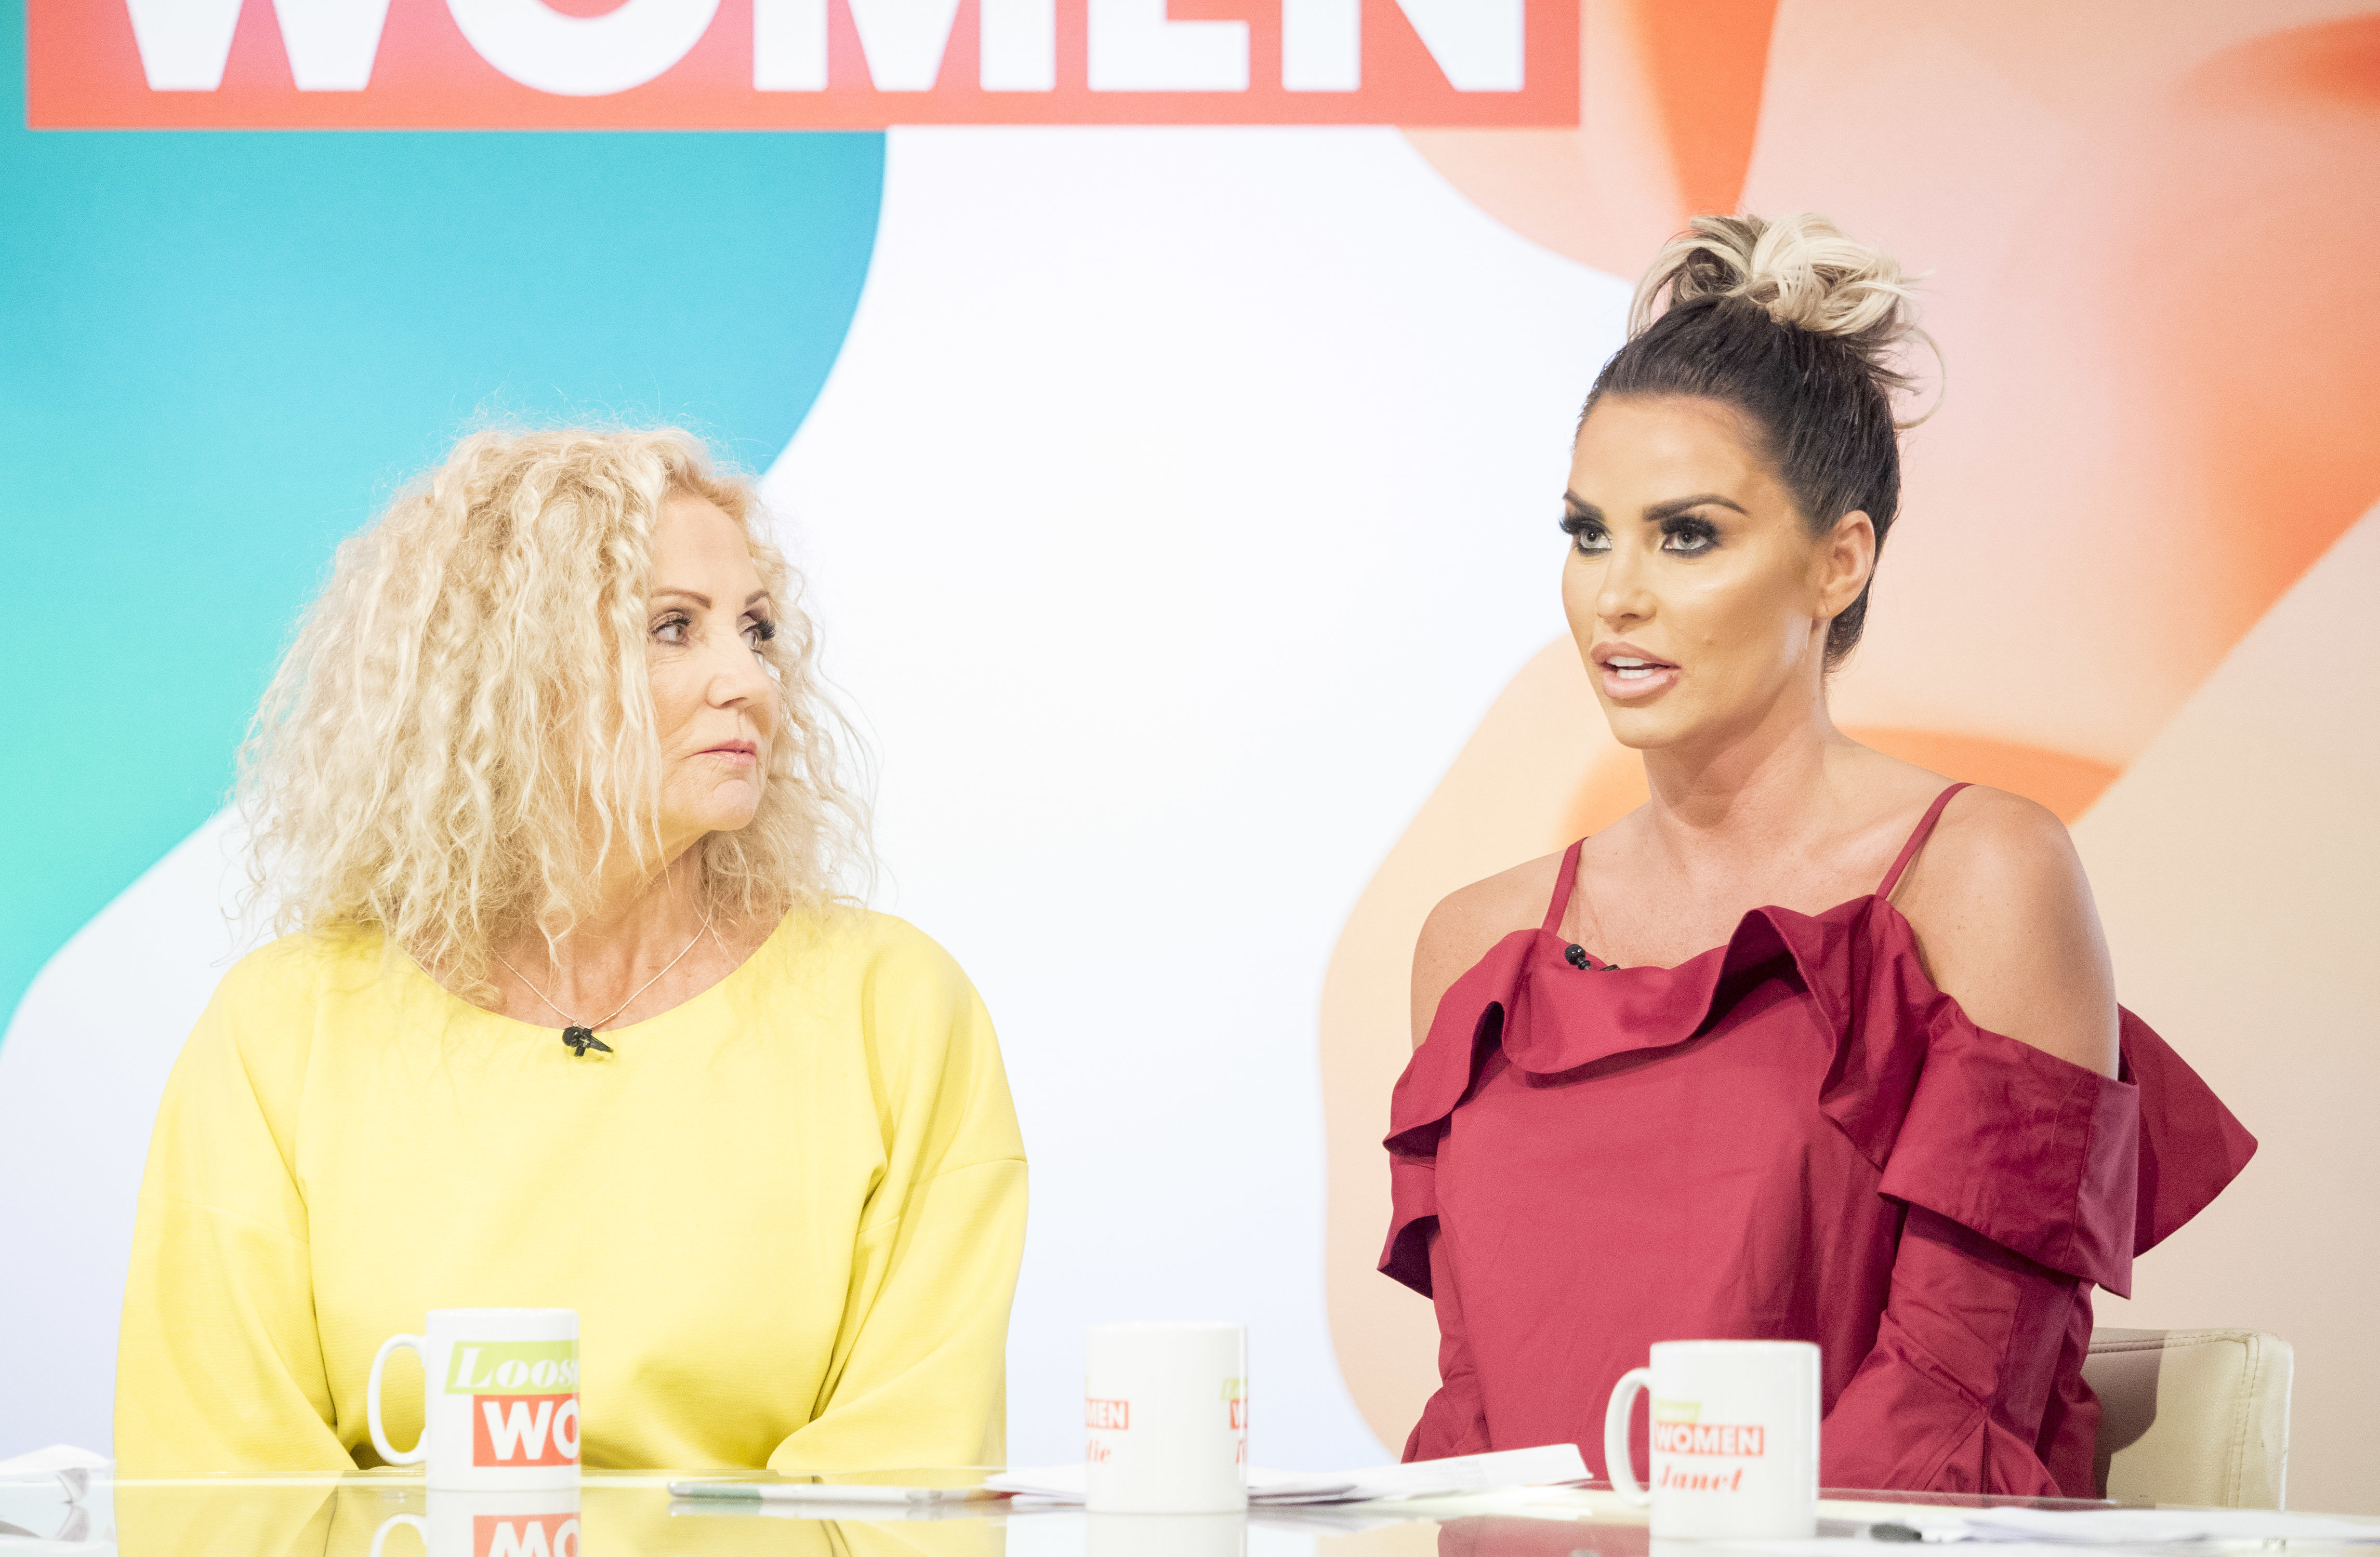 Katie has previously appeared on the show with her mum to talk about her illness.